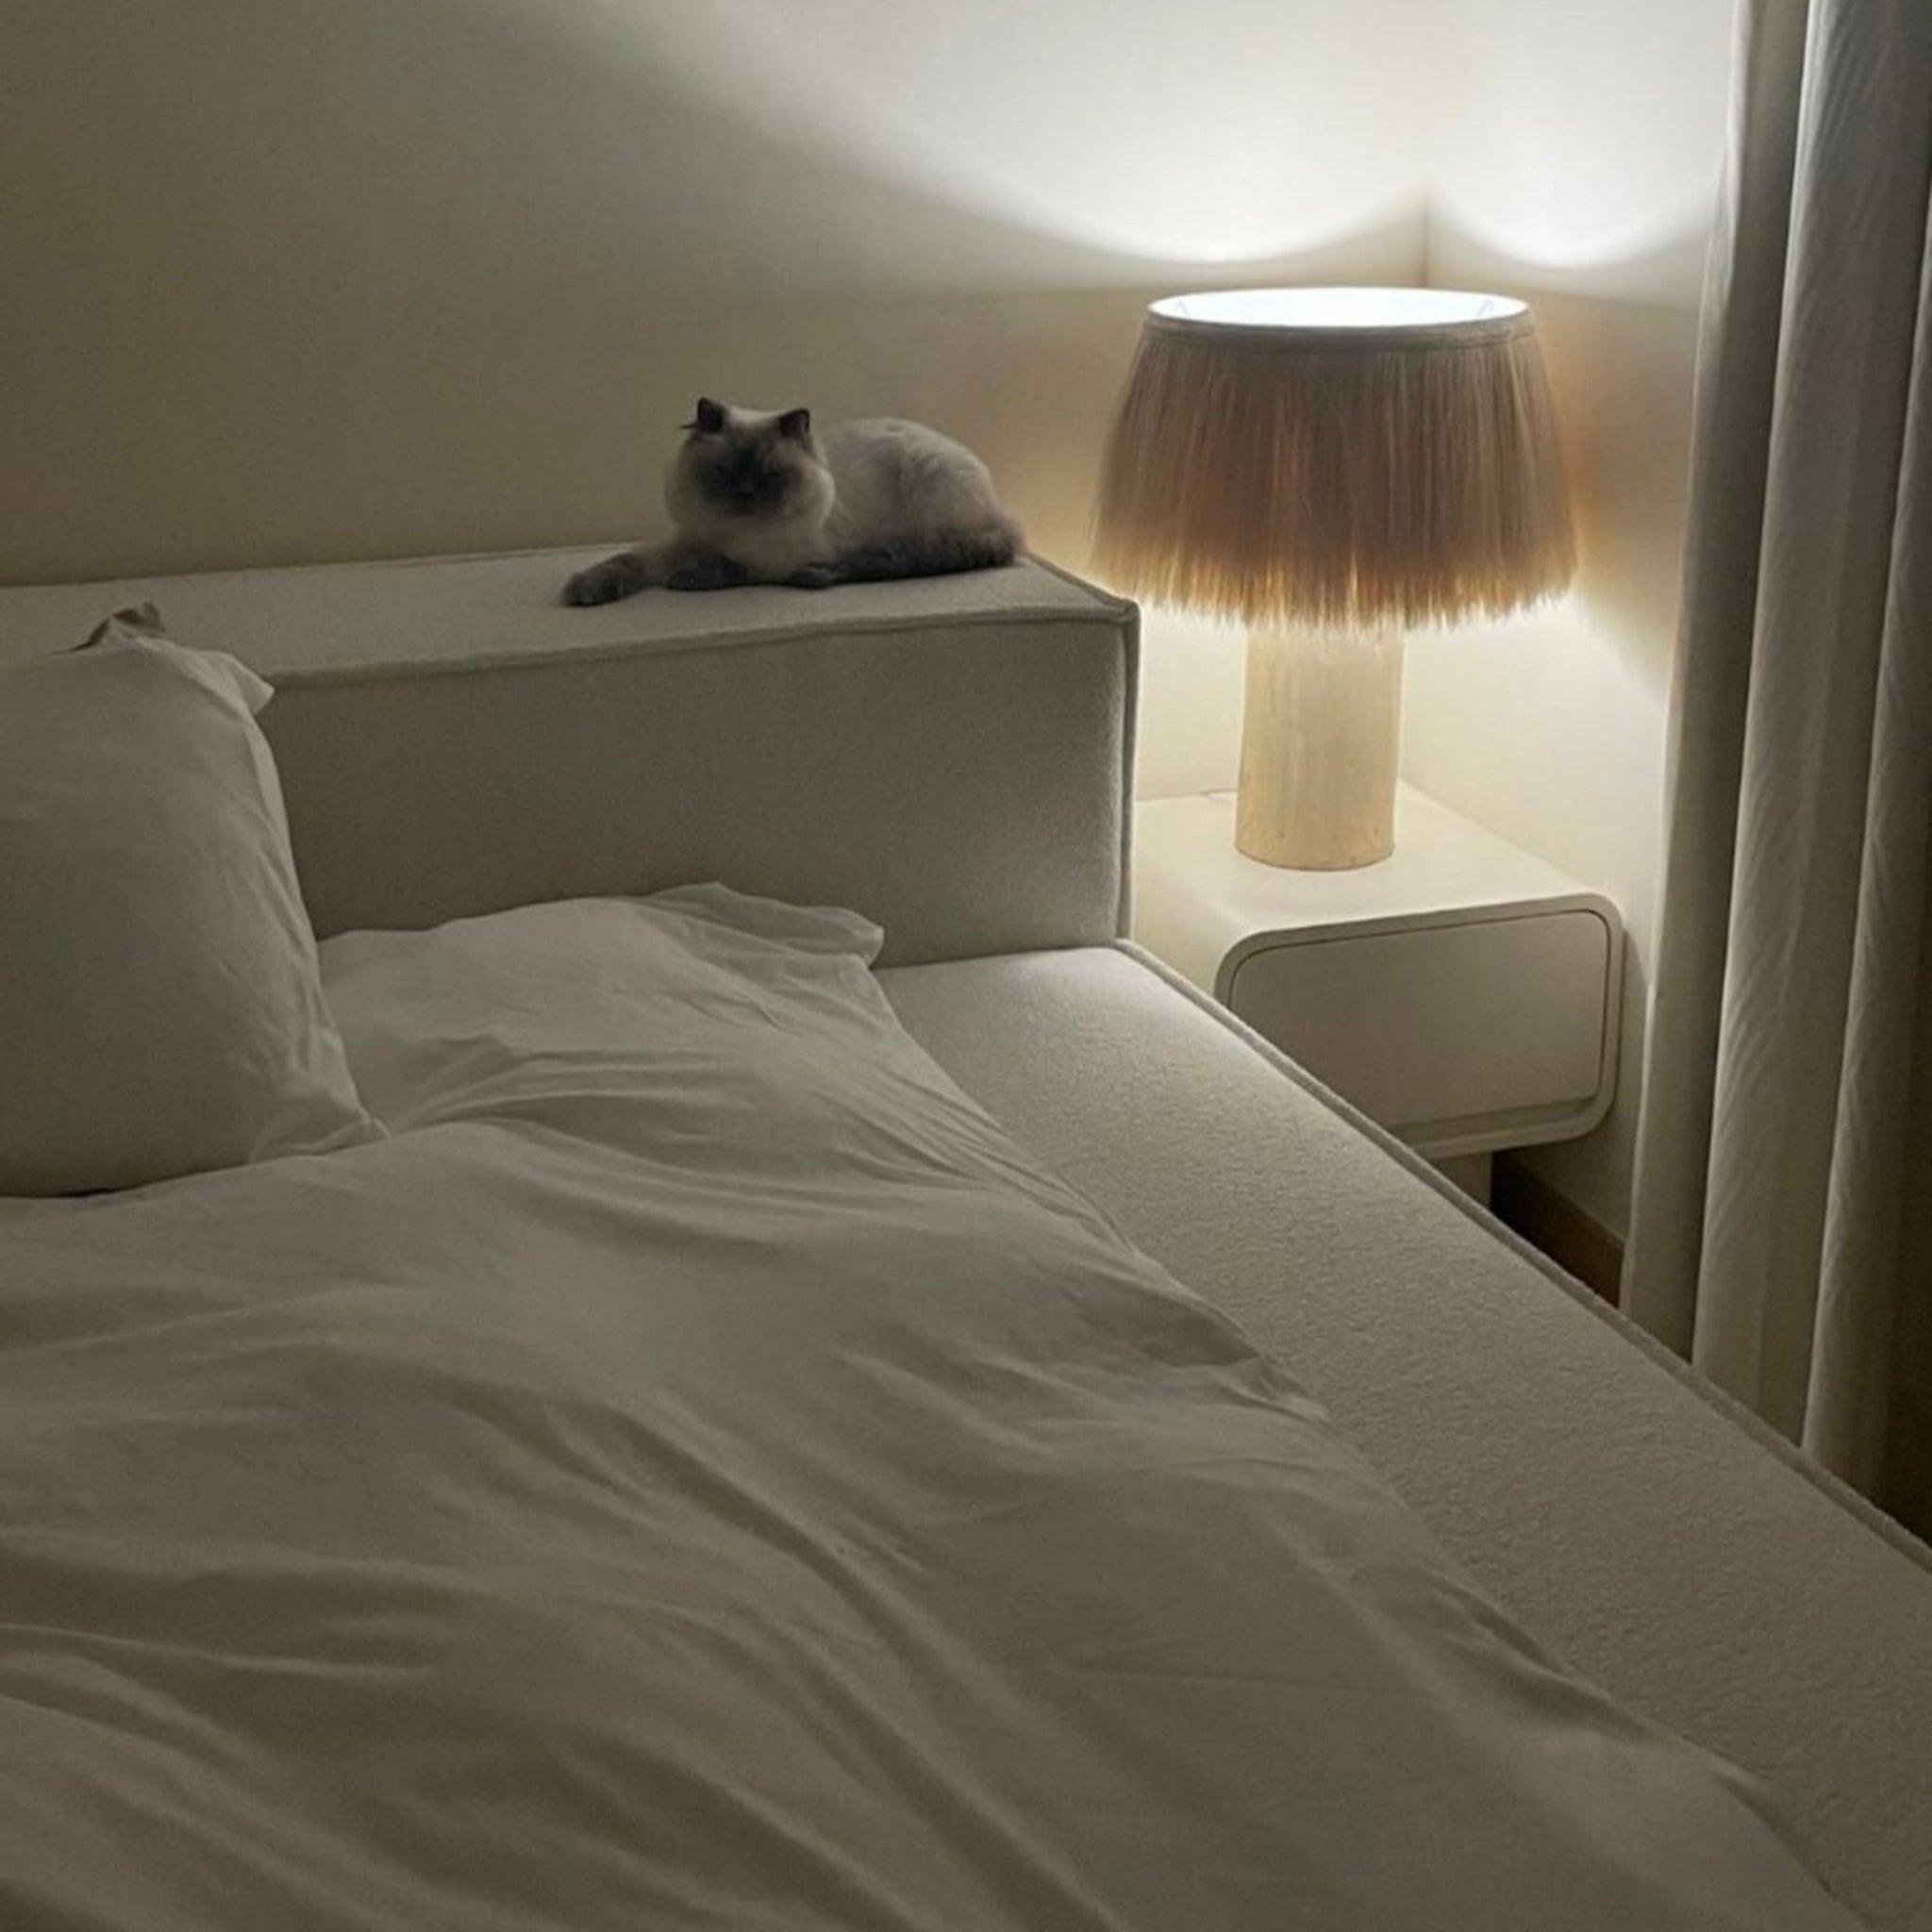 Playful cat perched on a cozy bed with a lamp. Soft bedding for a comfortable cat nap.